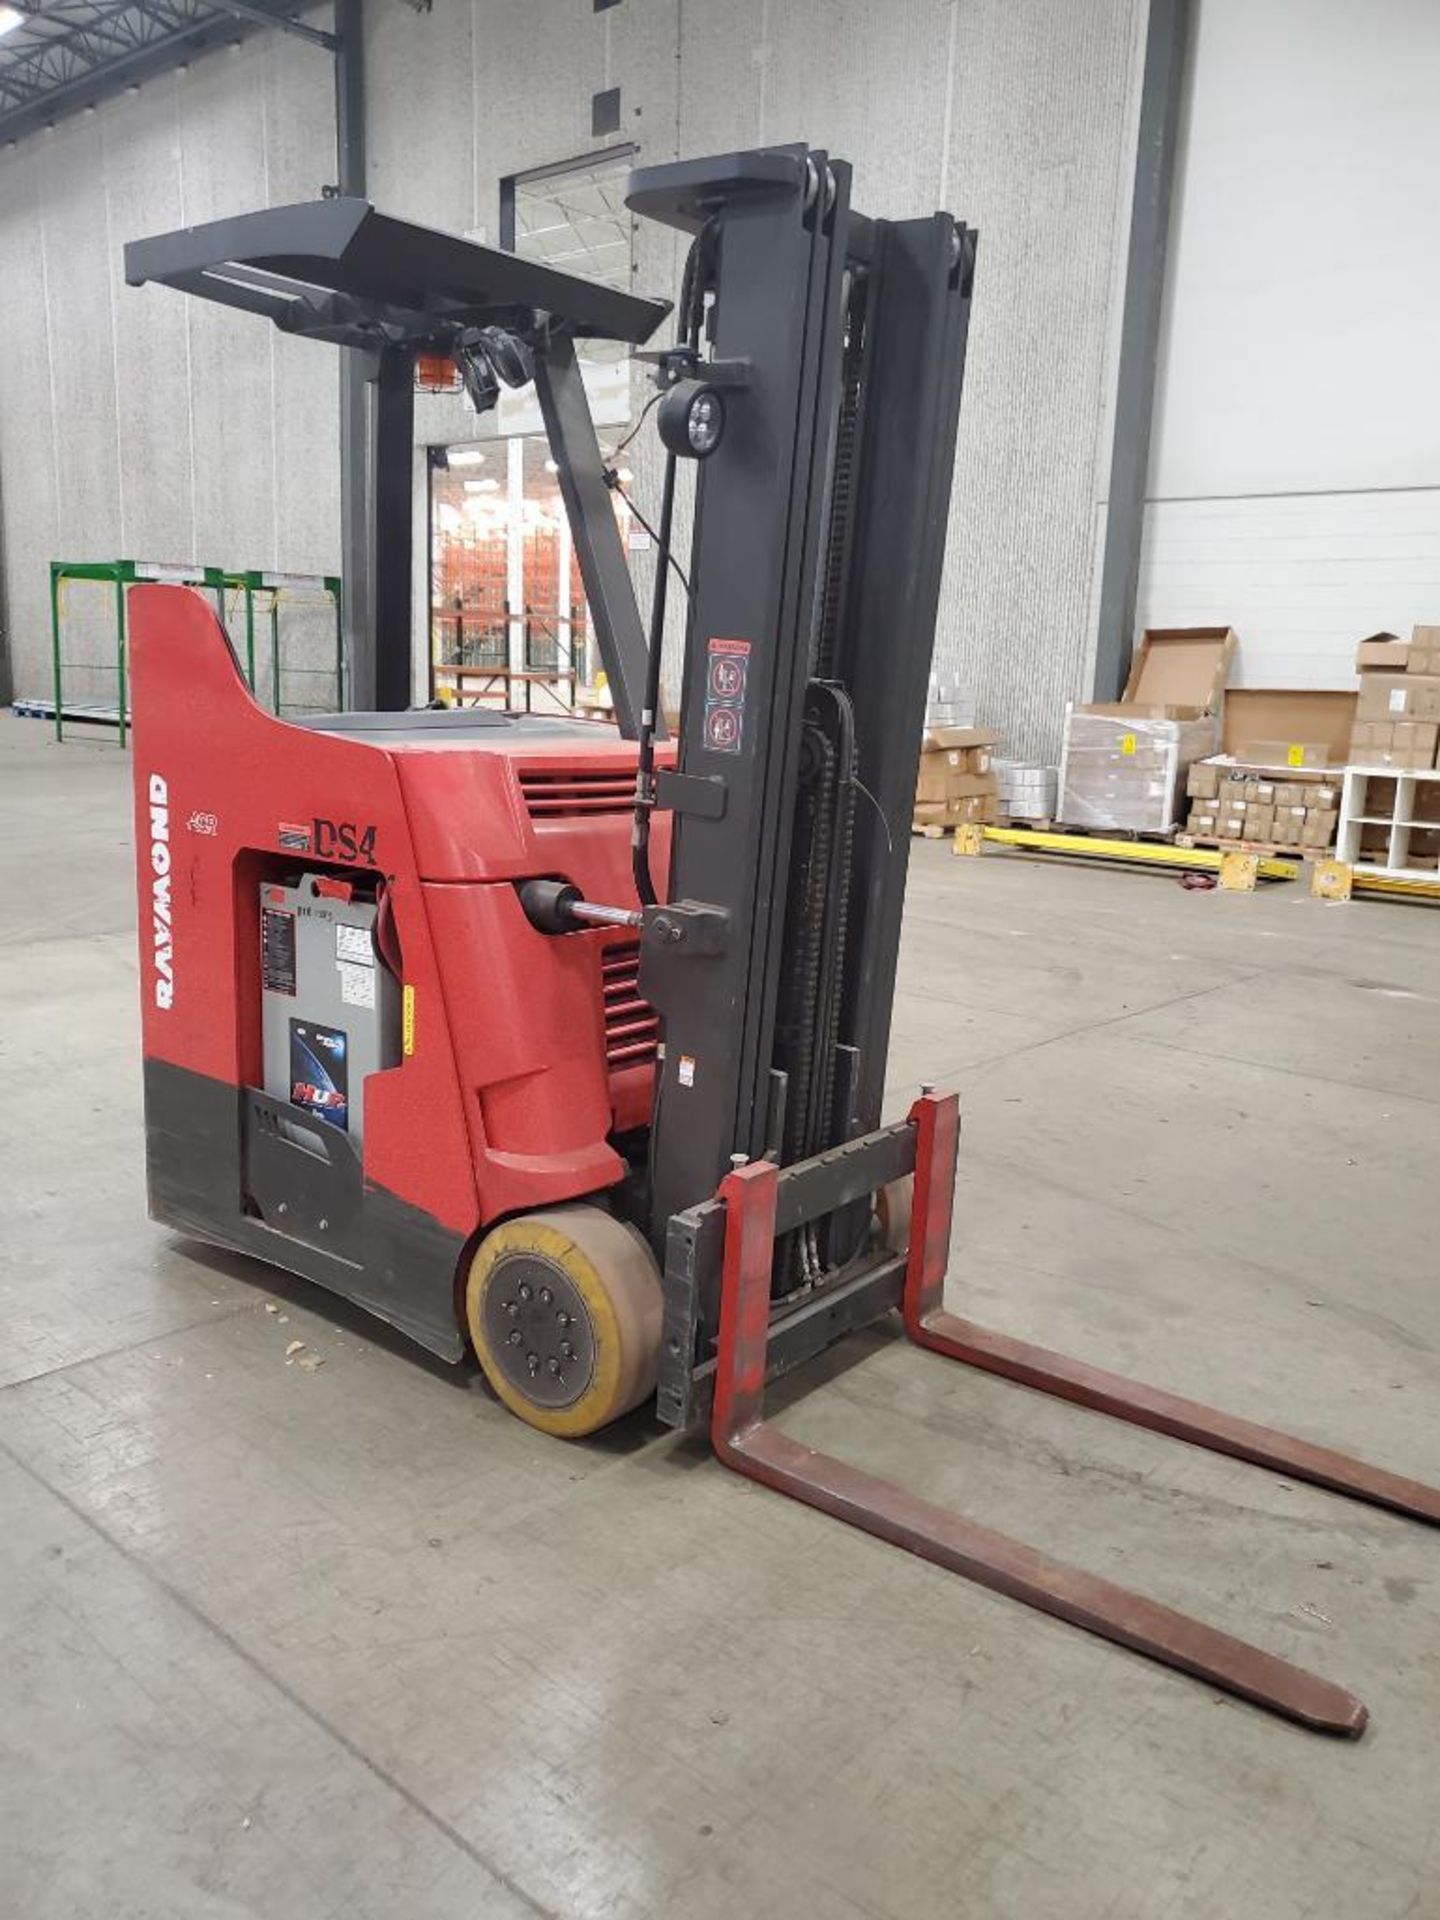 2014 RAYMOND ORDER PICKER; MODEL 415-C35TT, S/N 415-14-44015, WITH IWAREHOUSE MONITOR ATTACHMENT - Image 2 of 7